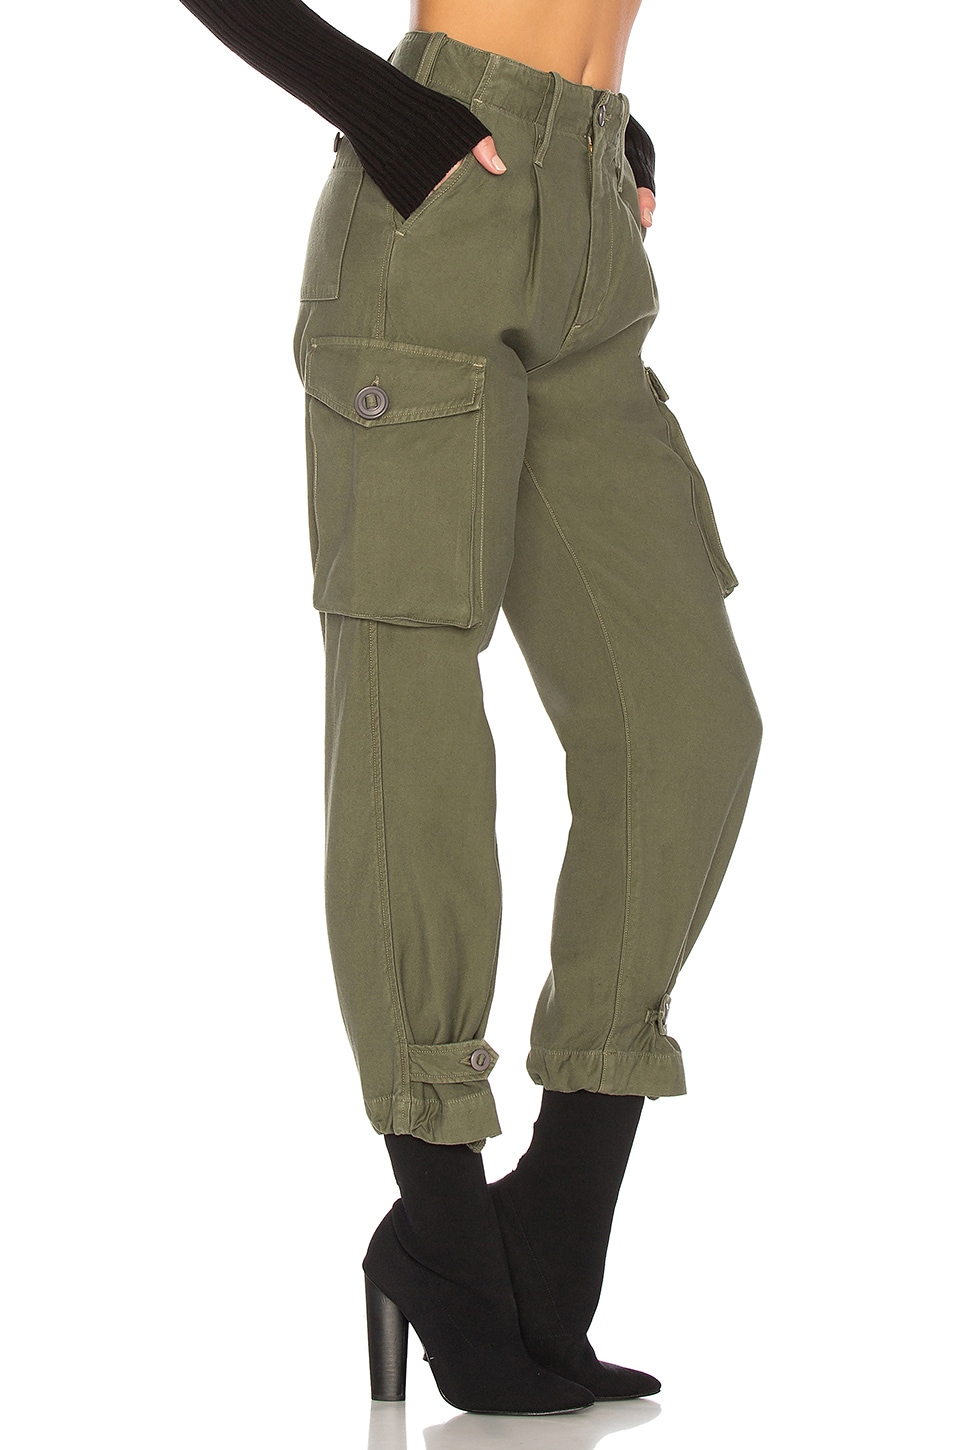 Citizens of Humanity Zoey High Waist Cargo Pant in Sergeant Green | REVOLVE